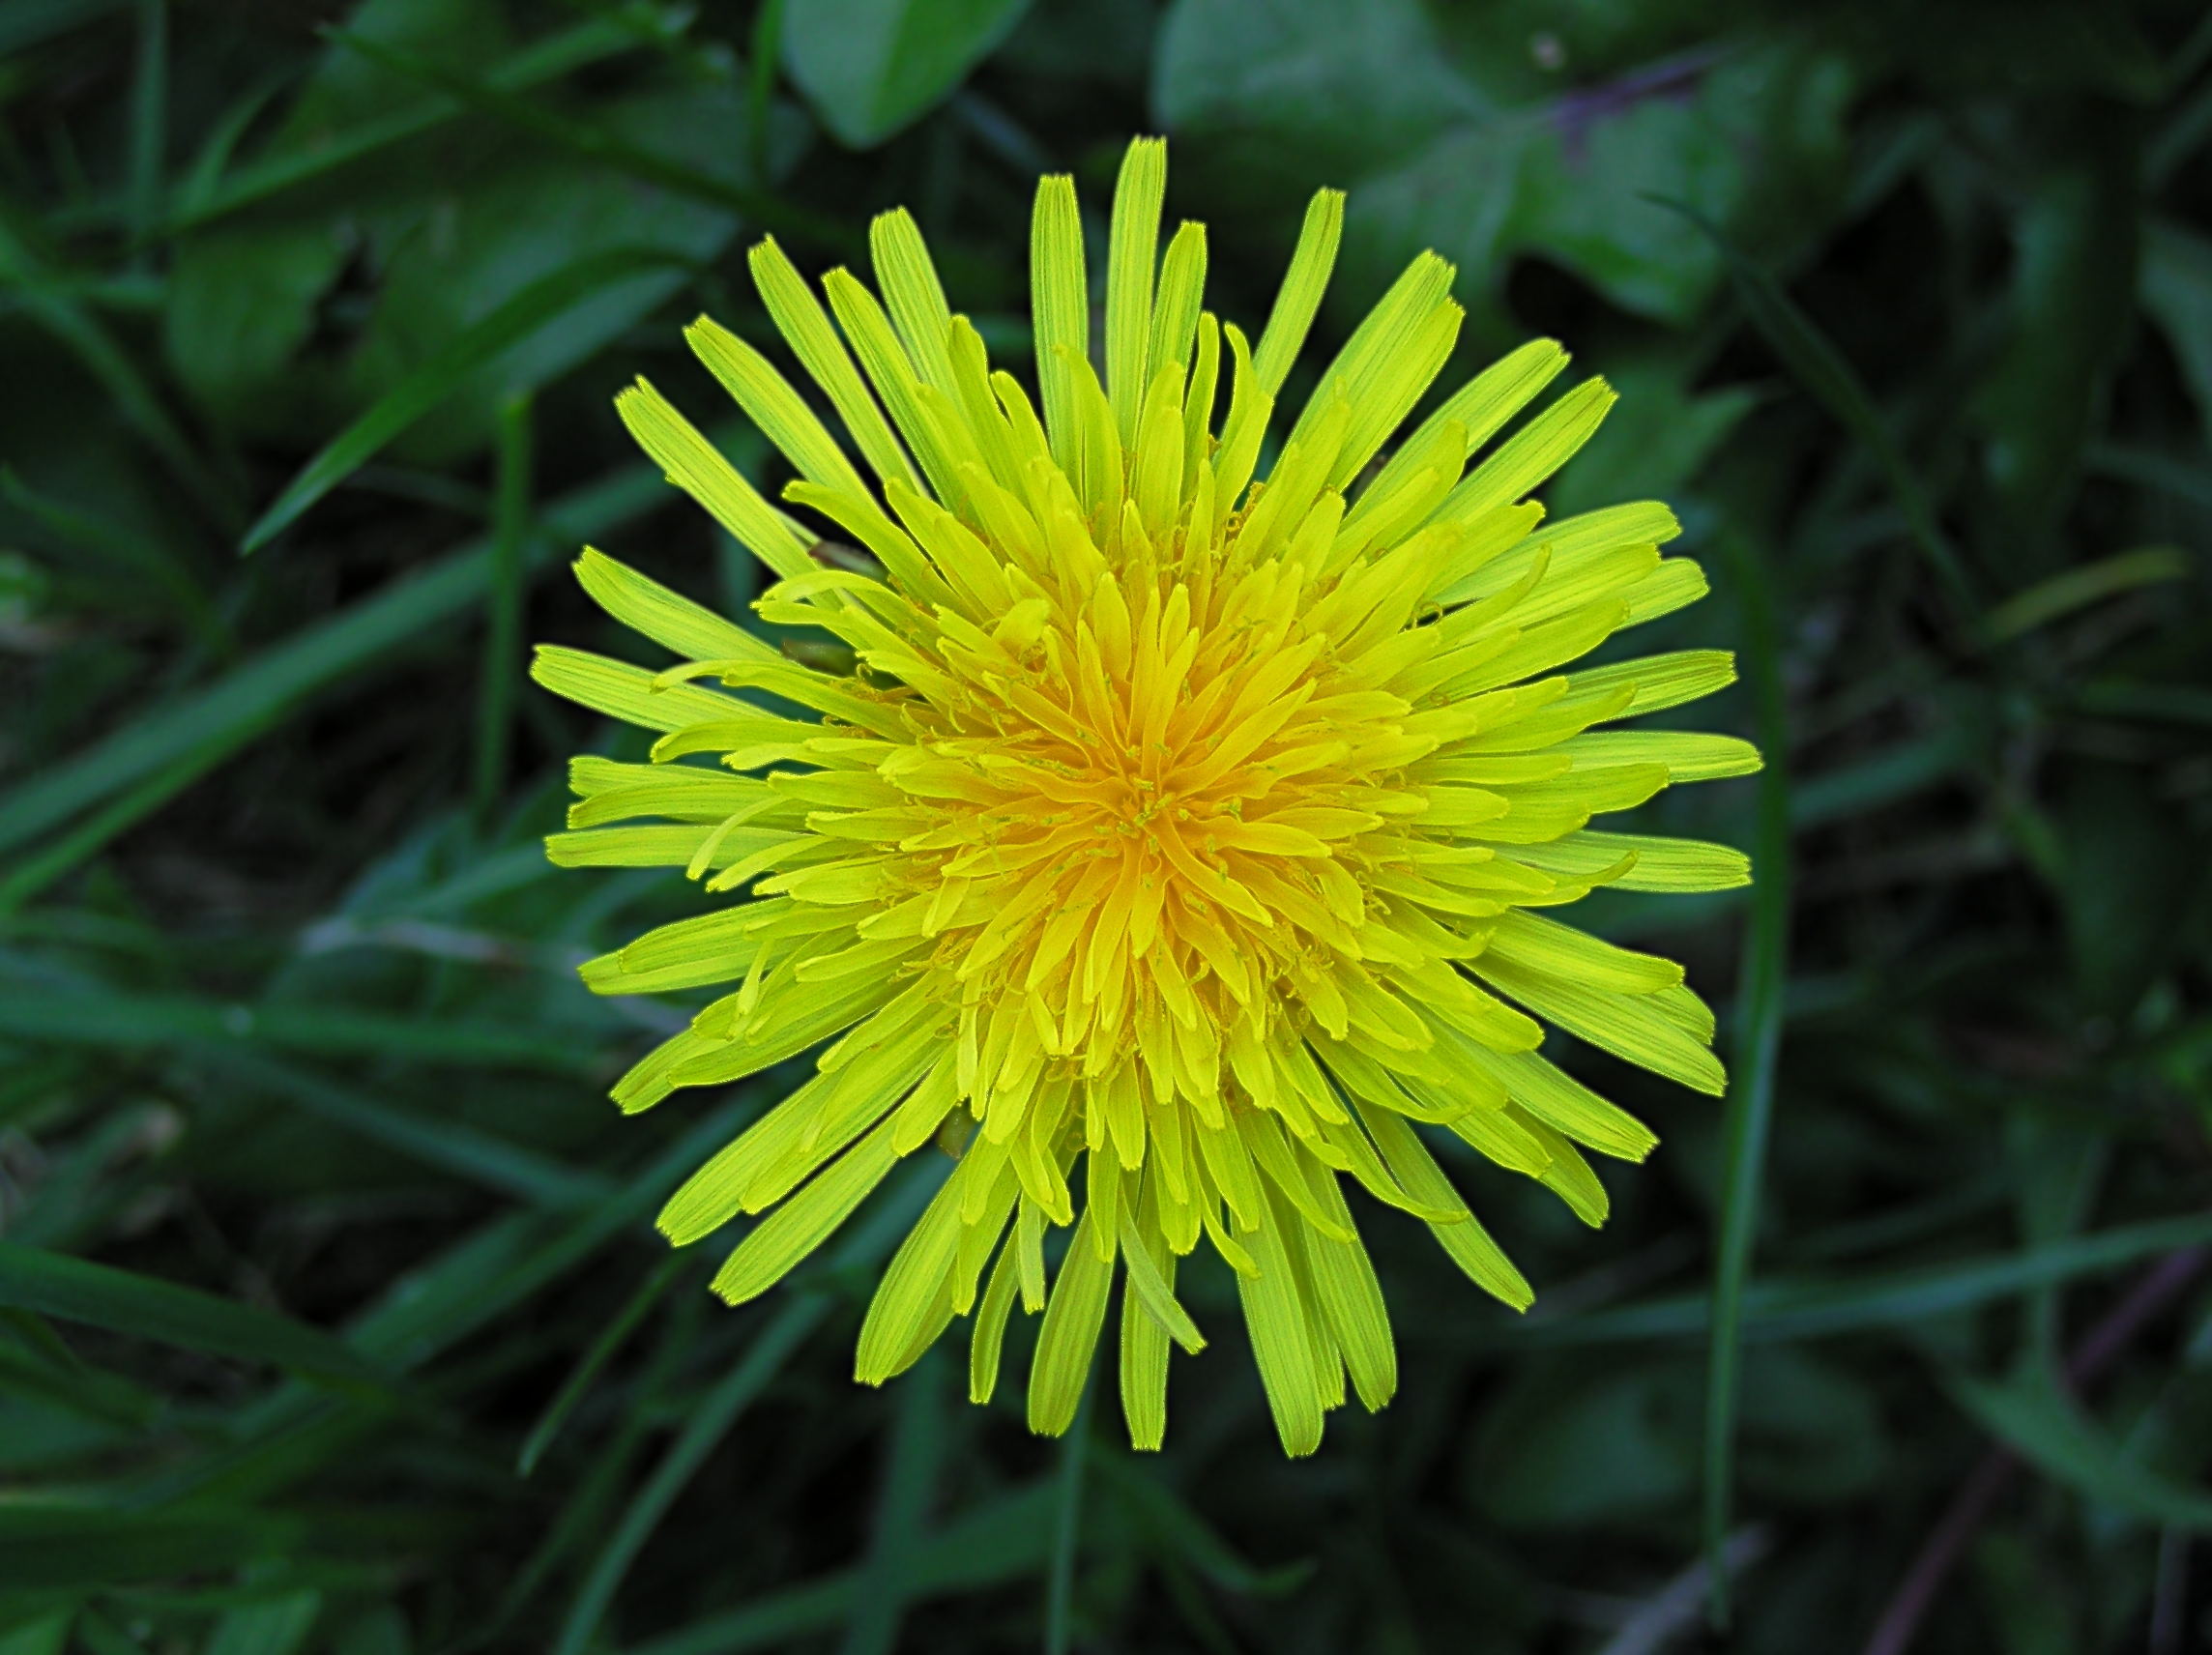 bright yellow blossoming petals of the dandelion flower